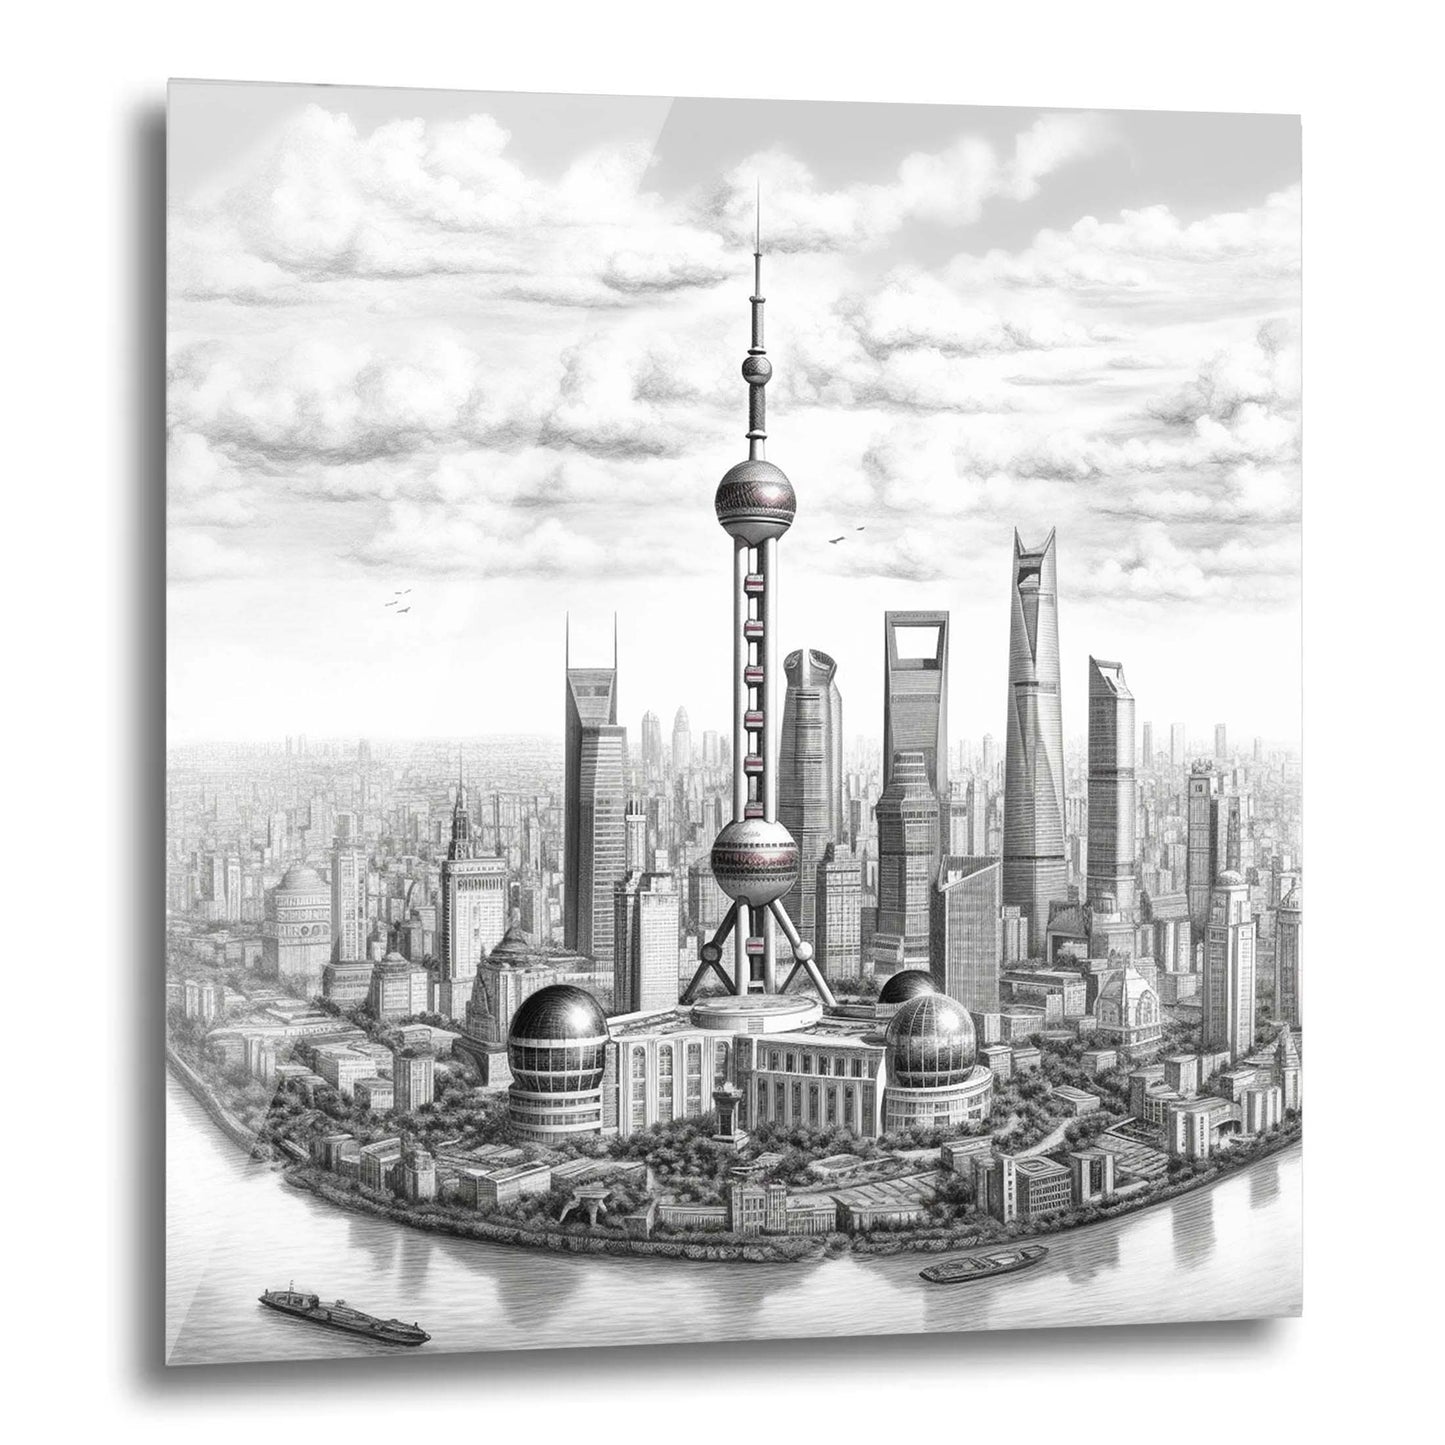 Shanghai Skyline - Mural in the style of a drawing